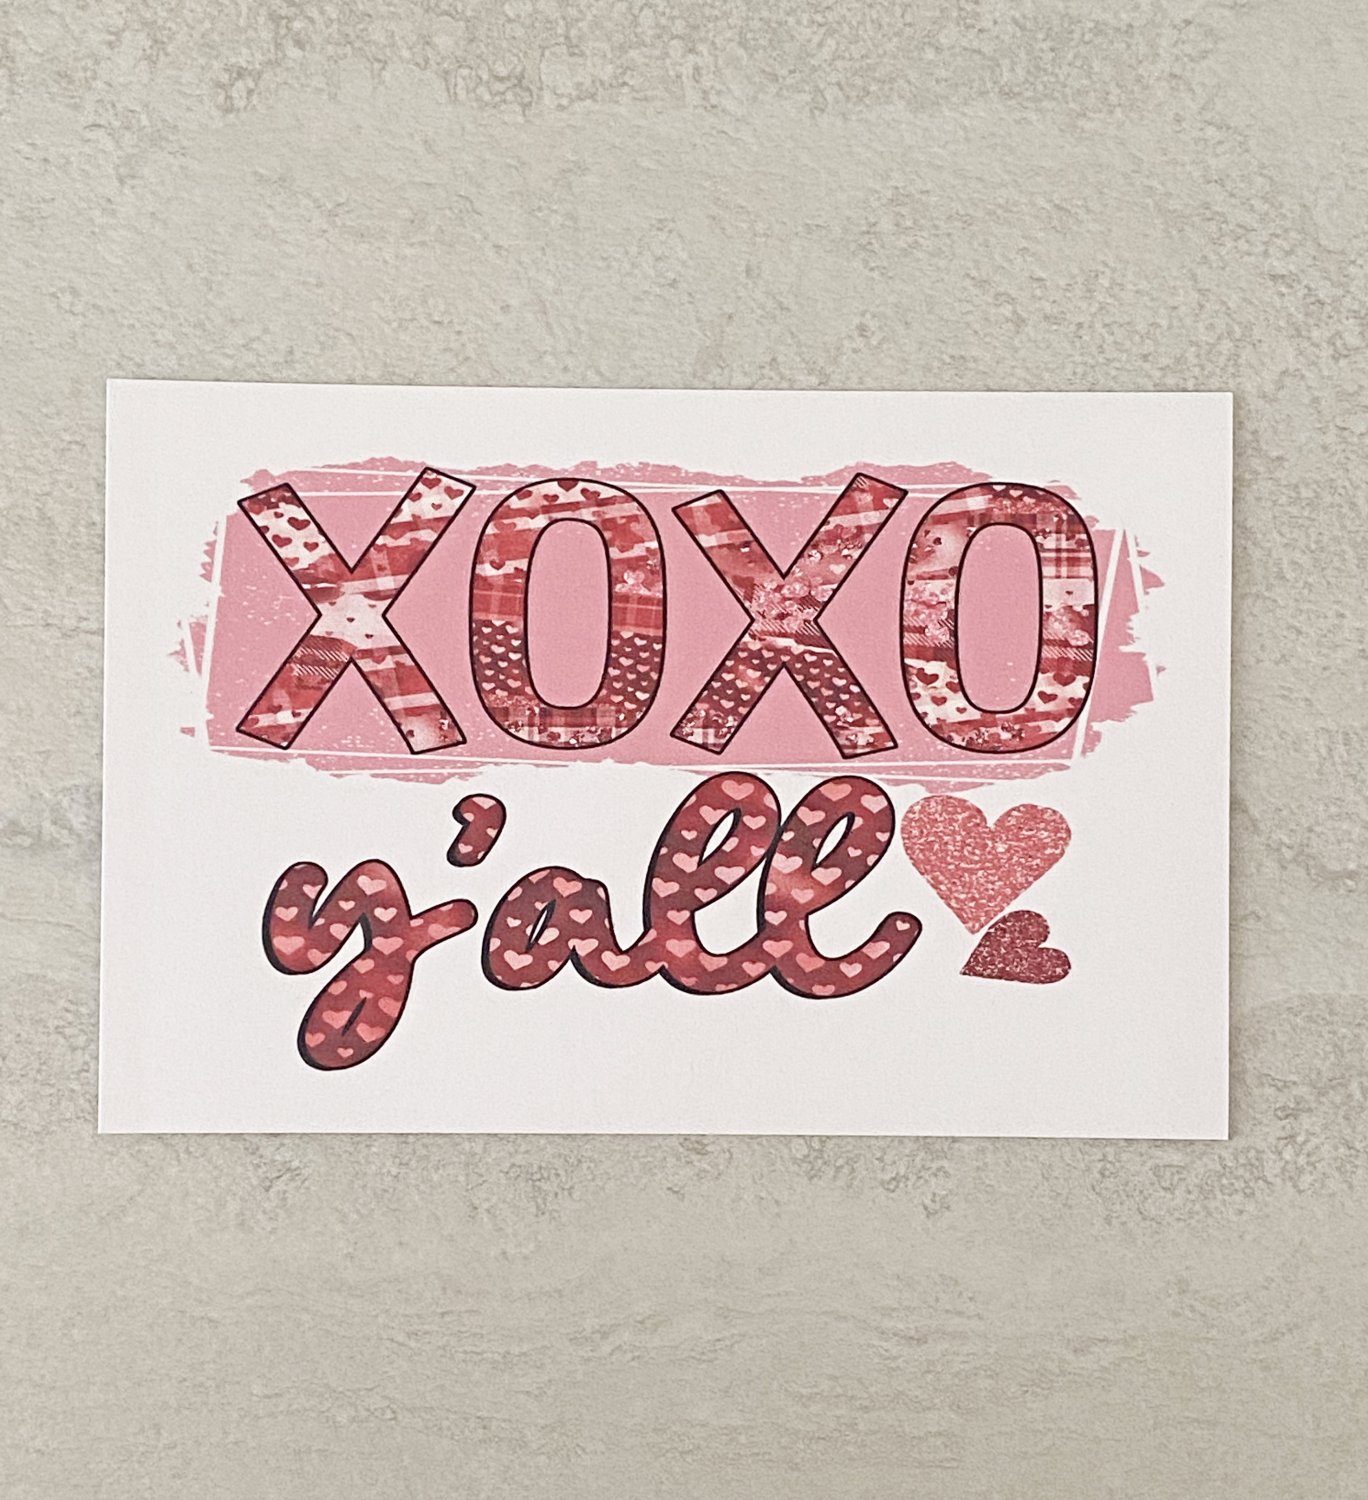 XOXO Y'all Hugs and Kisses Valentine Stationery Postcards 5 Piece Set